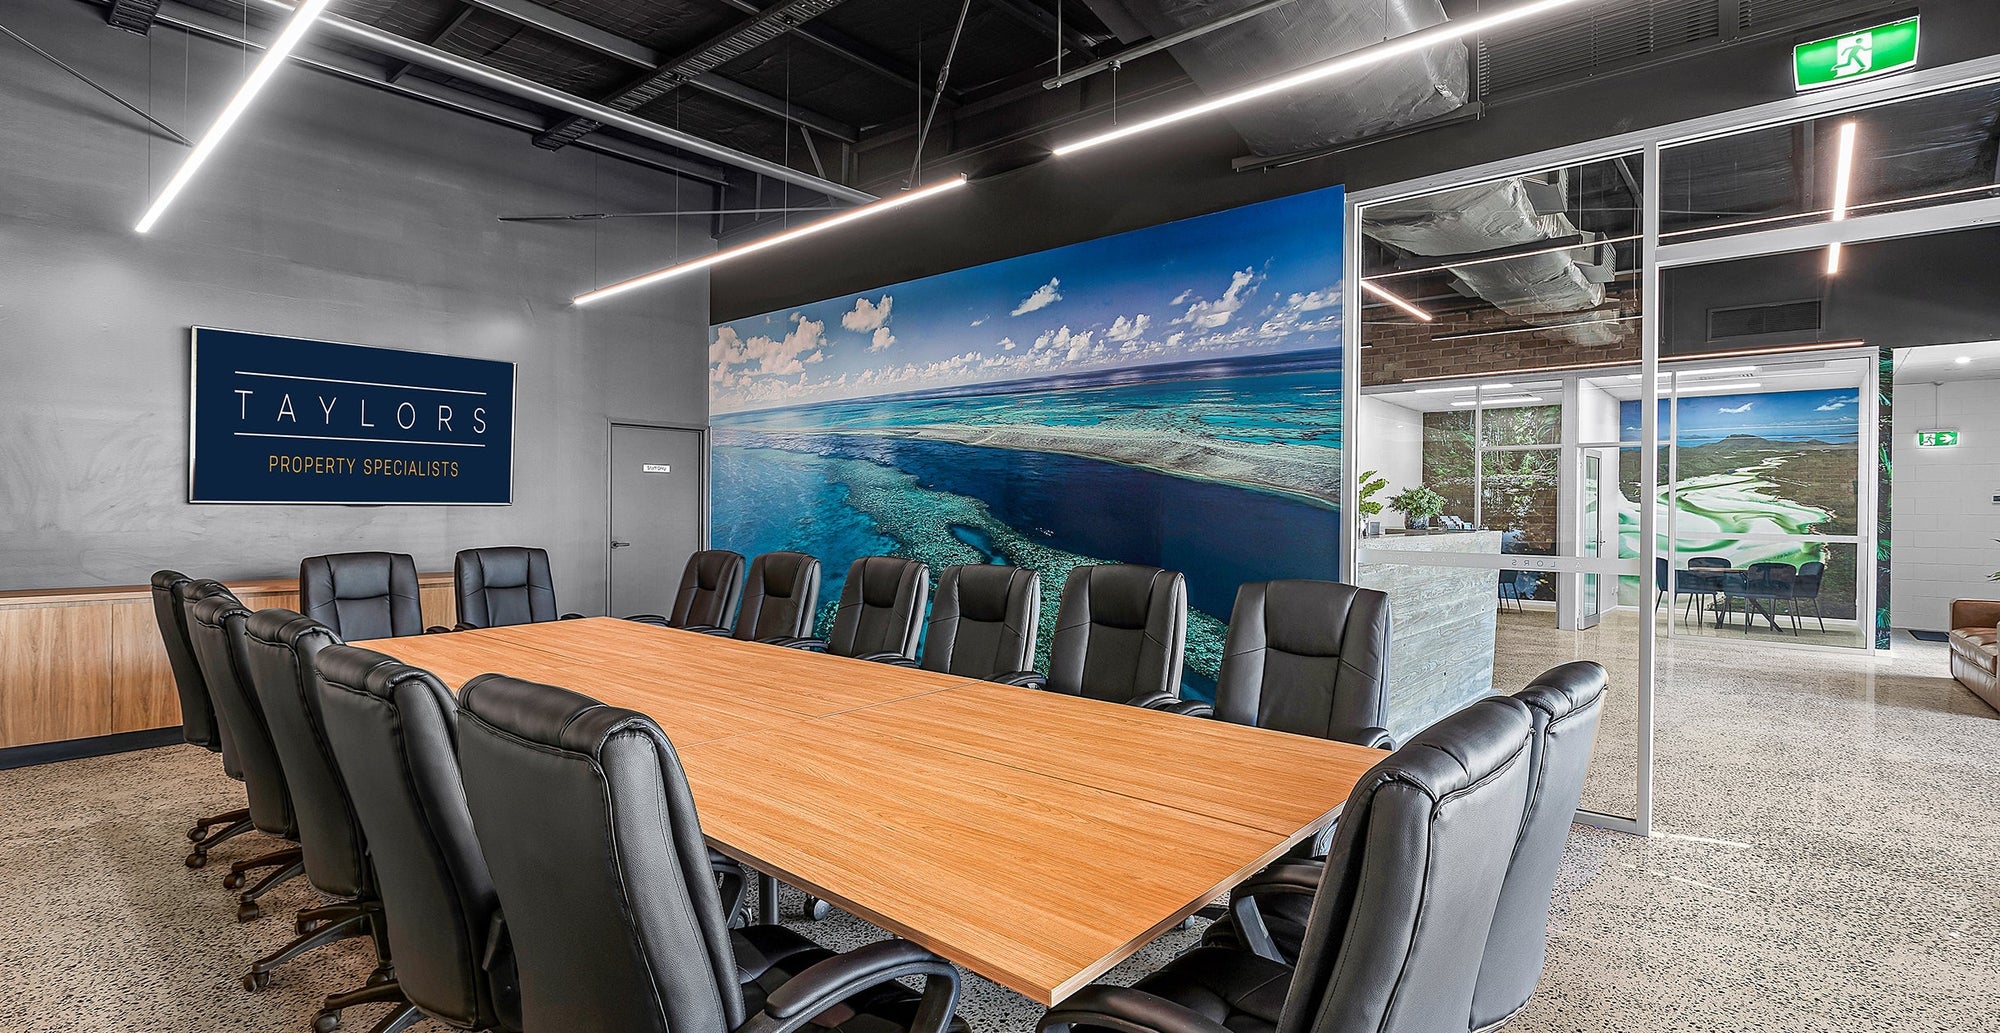 taylor property specialists conference room with waterway print